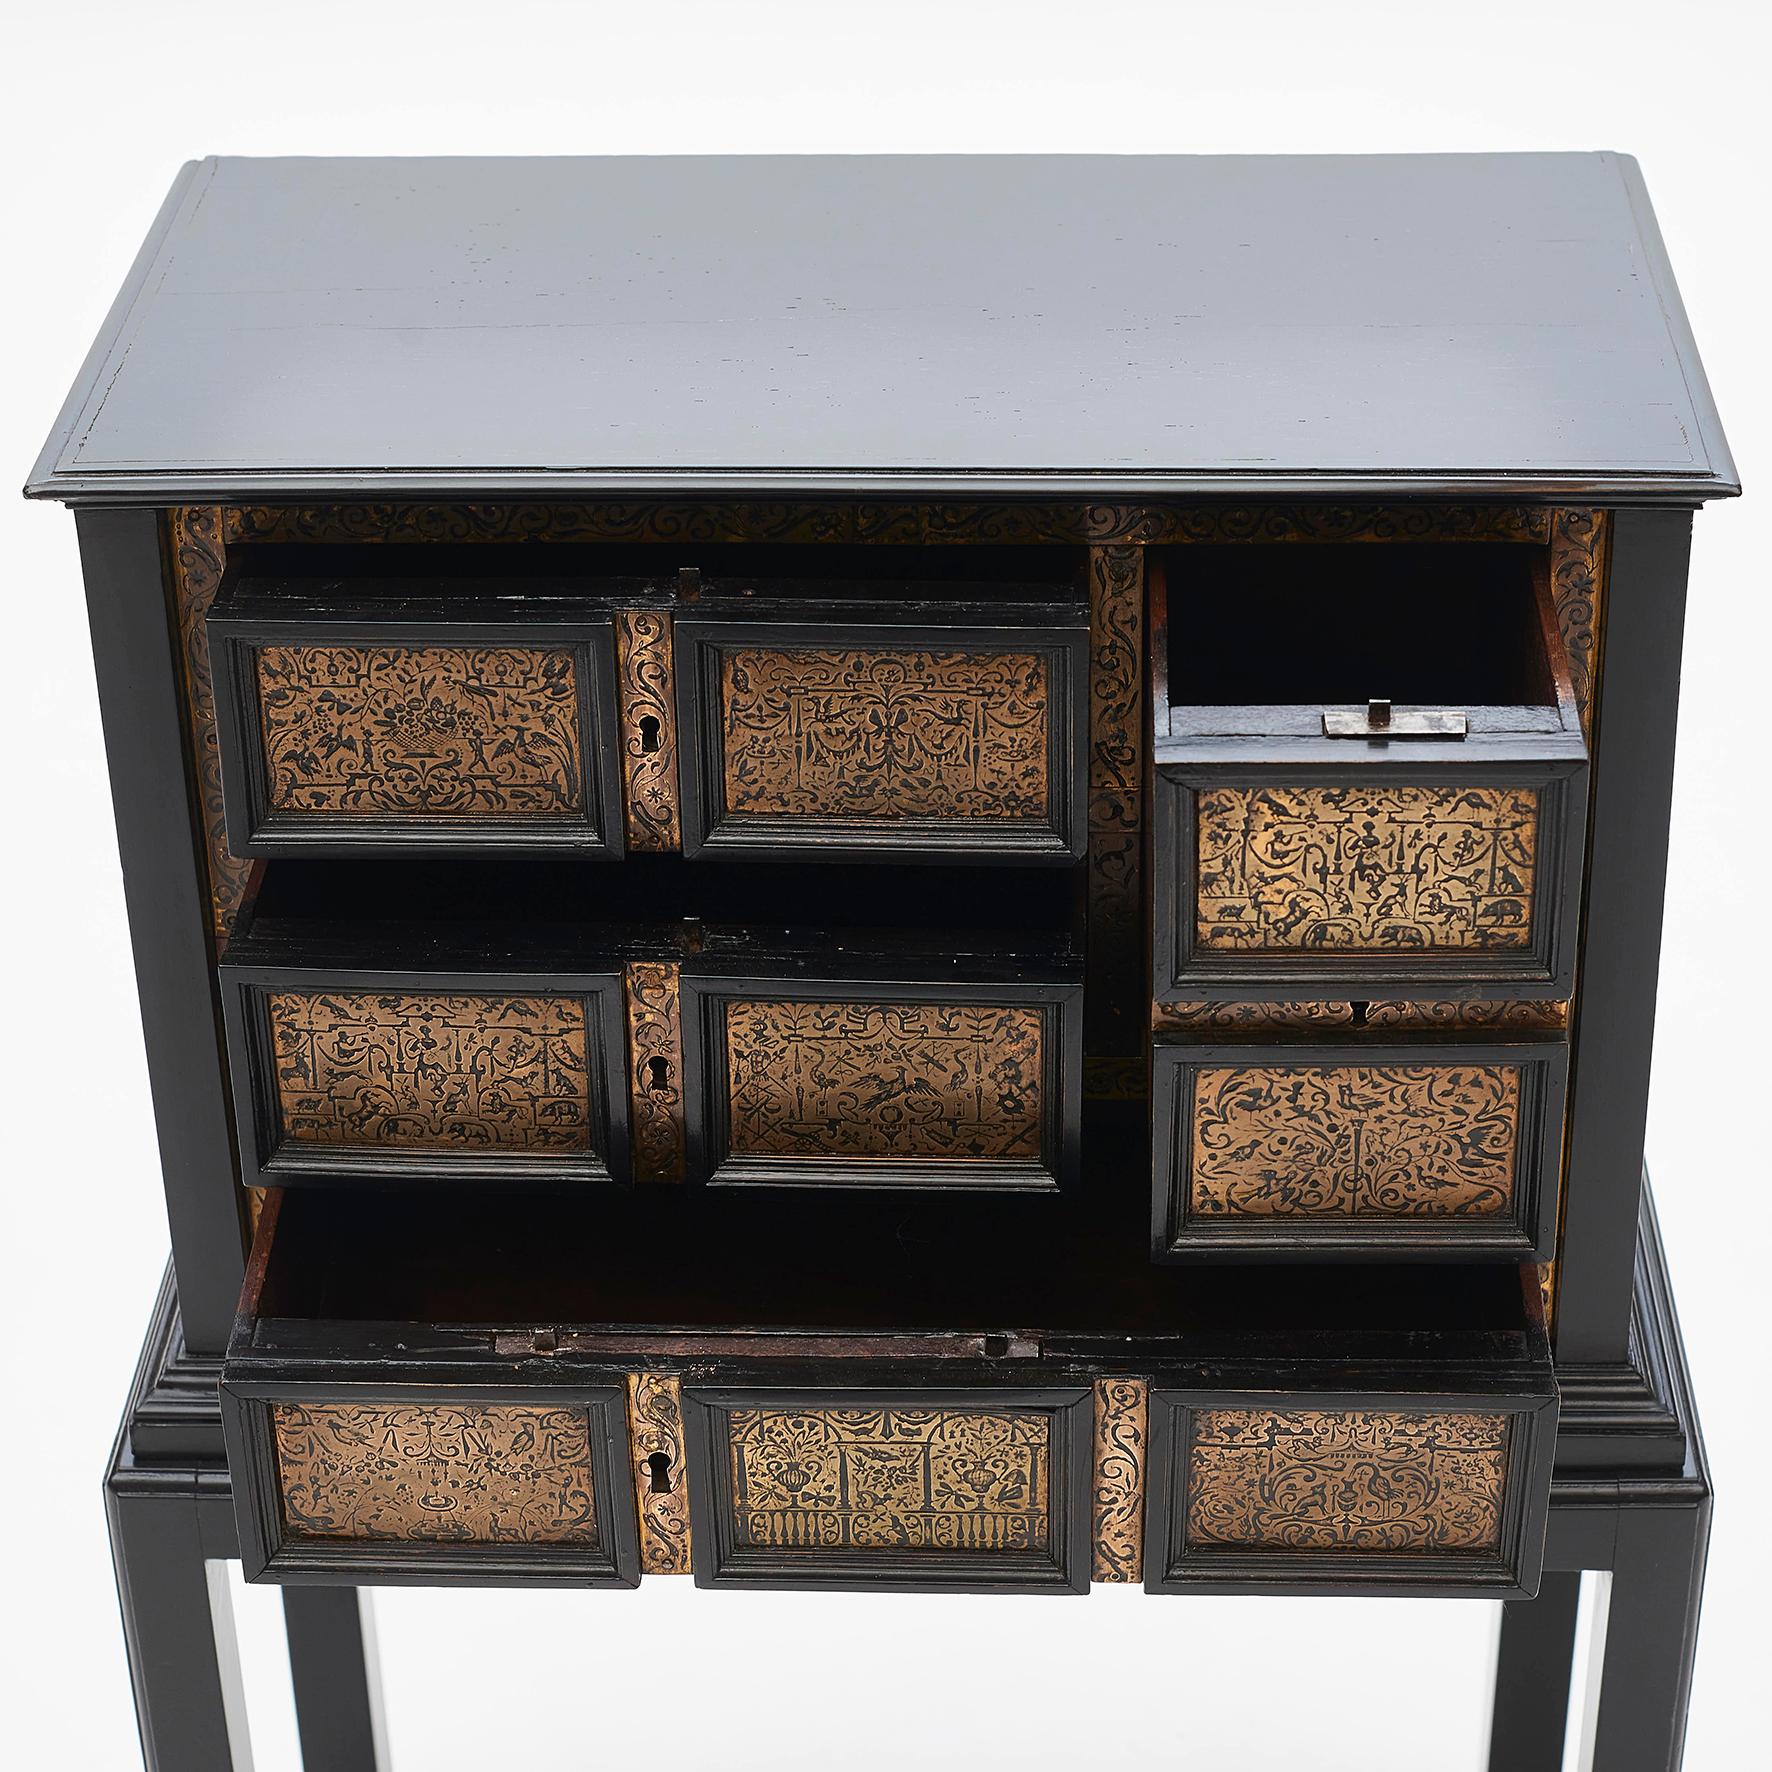 18th Century Small Elegant Baroque Cabinet in Ebonized Wood with Ornamented Brass Engravings